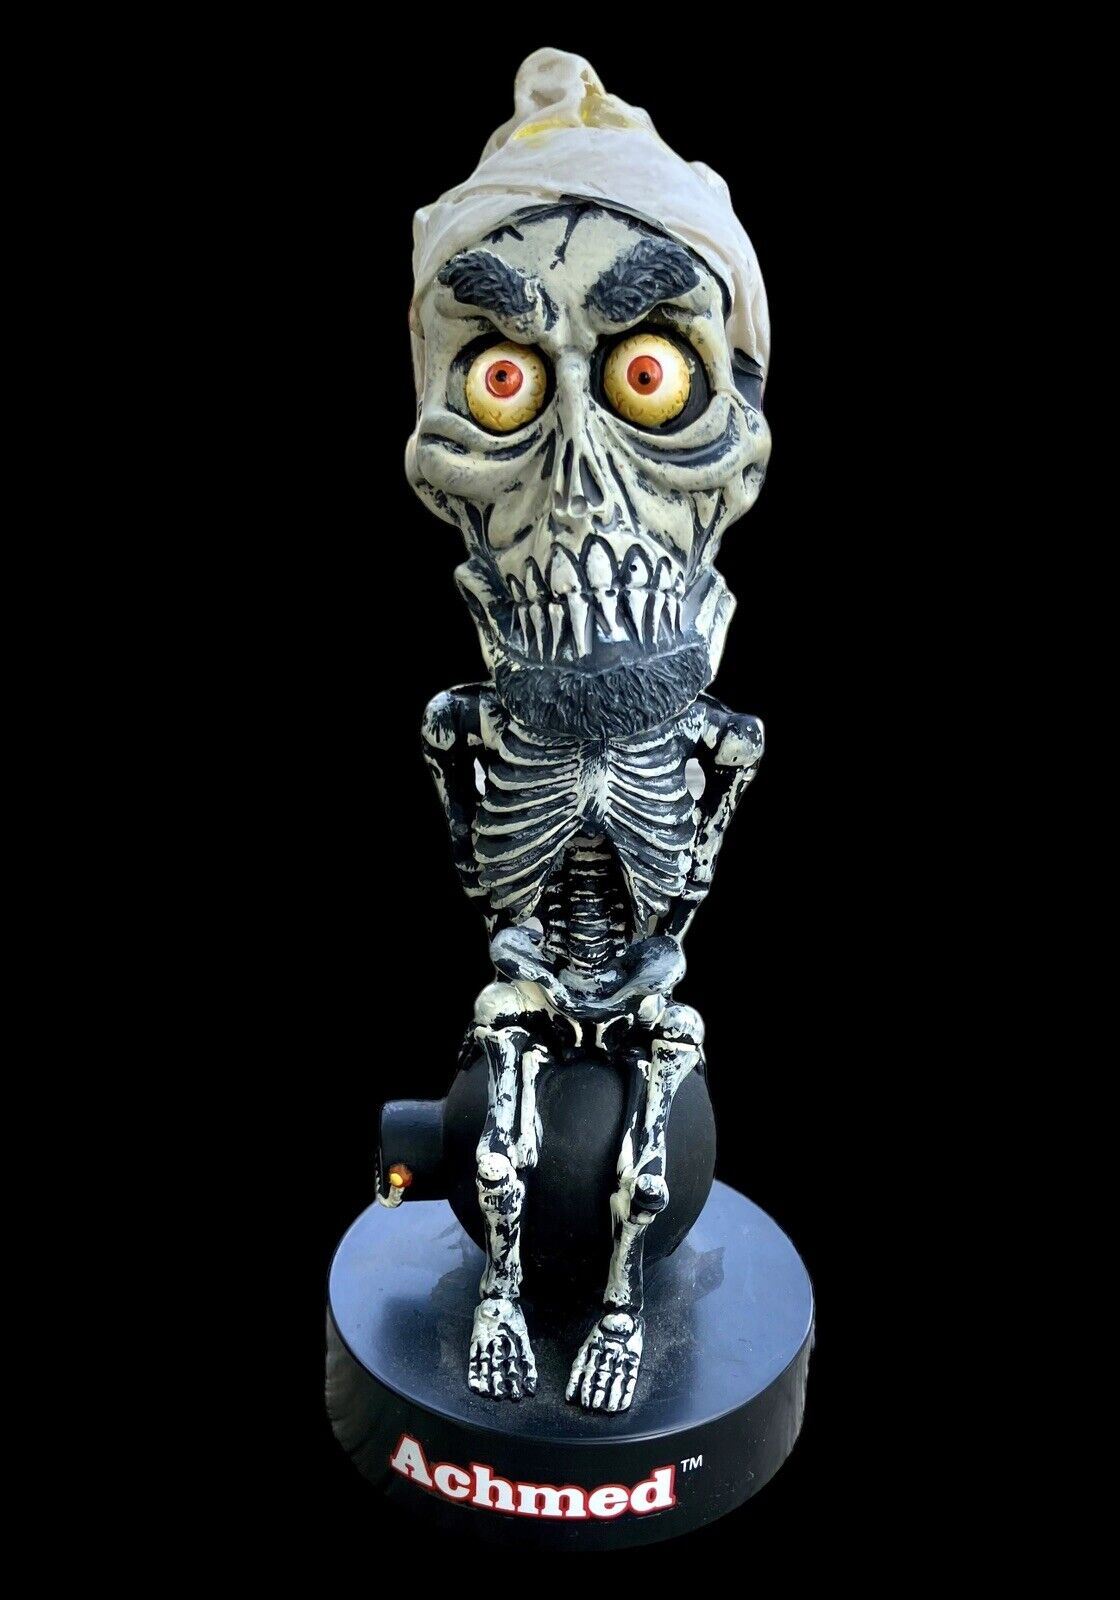 Jeff Dunham ACHMED Talking NECA Head Knocker Bobblehead Collectible WORKS GREAT